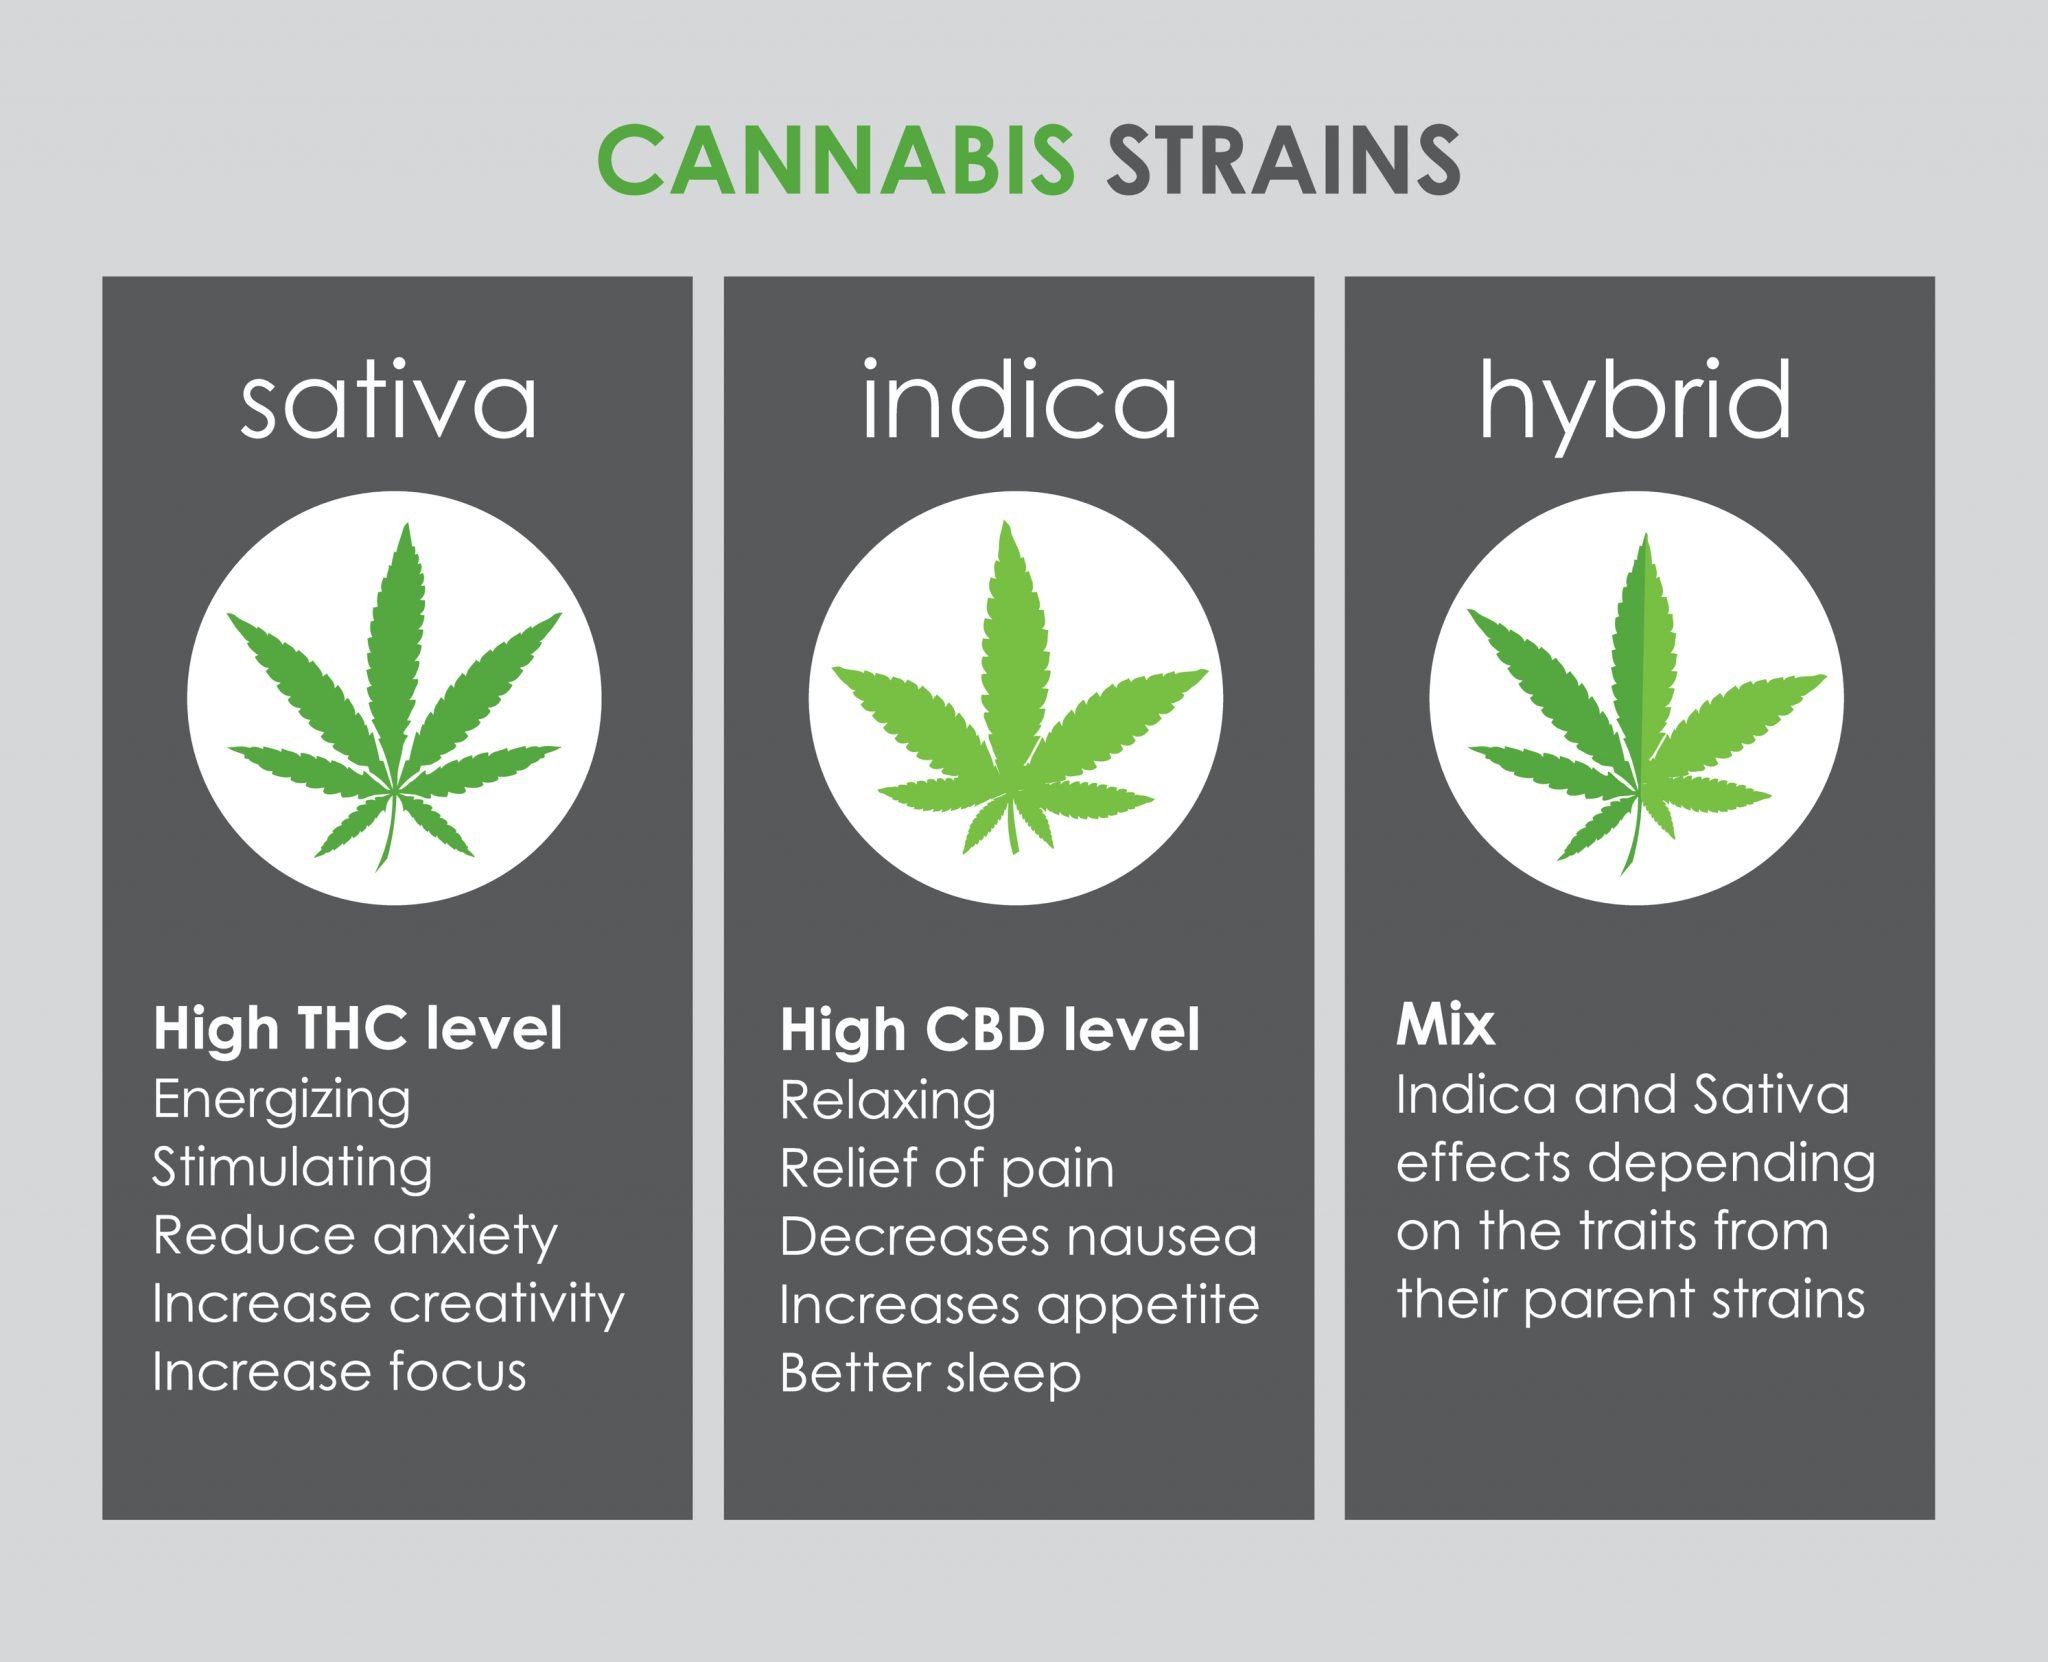 differences between Indica, sativa & hybrid